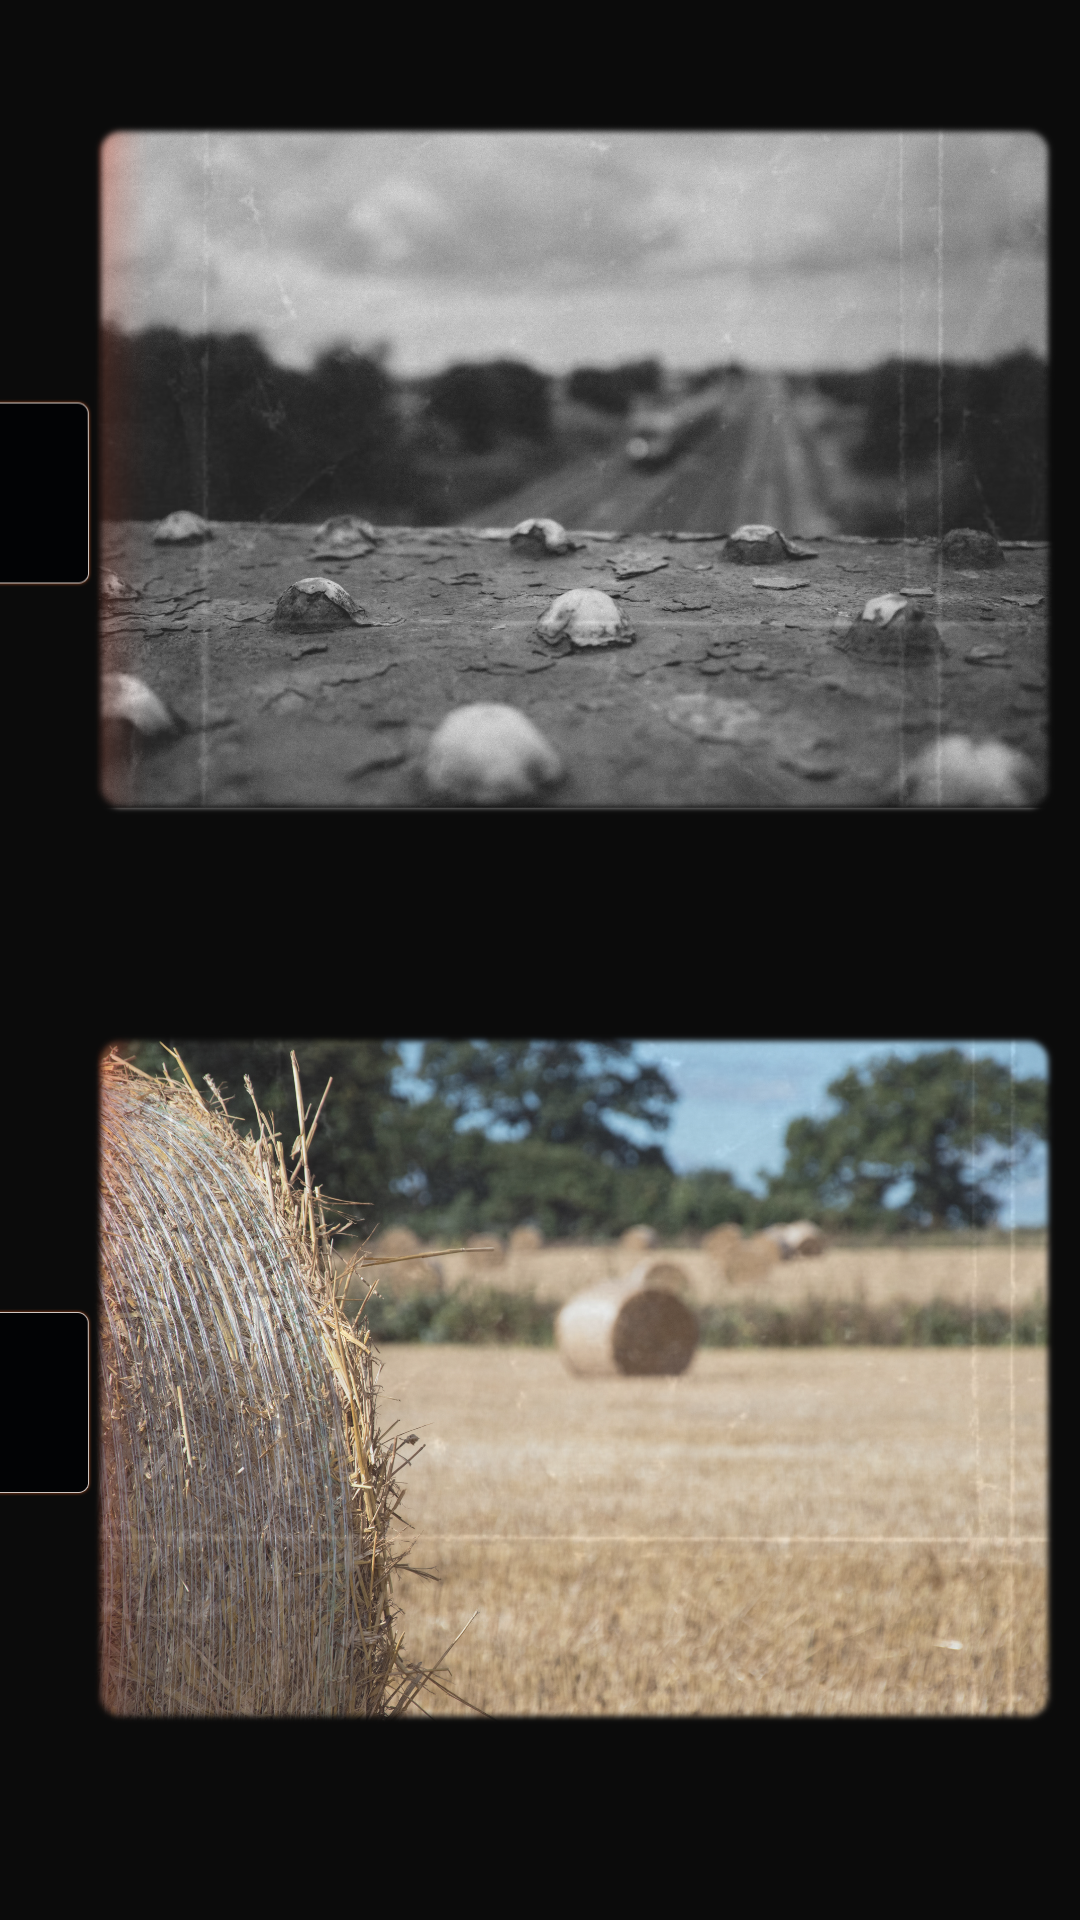 Retro Photography Tip #4: Harness the Versatility of Depth of Field to Capture the Vintage Look